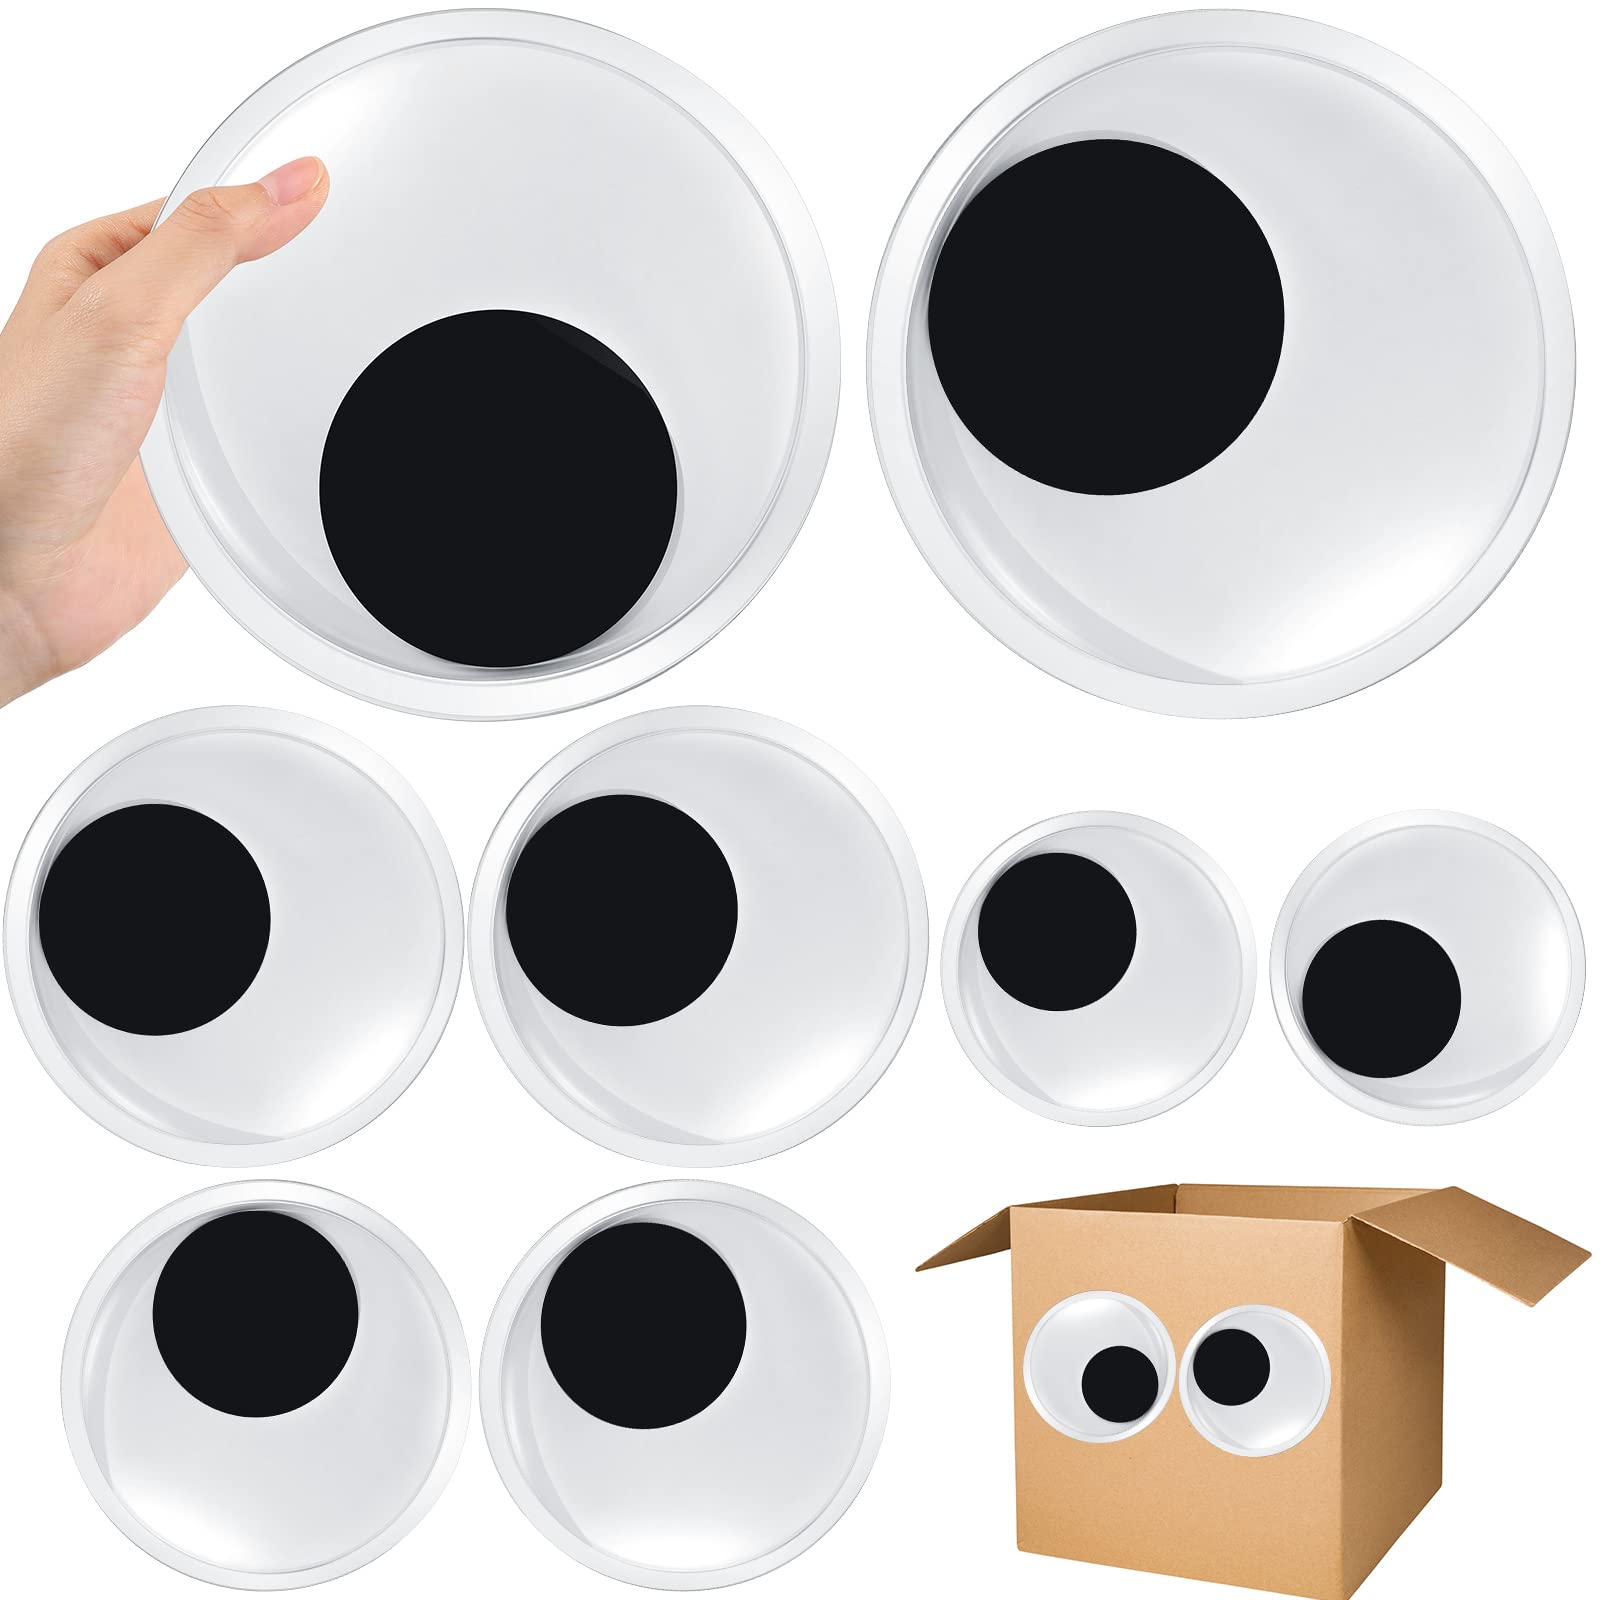 36 Pieces 7 Inch 6 Inch 5 Inch 4 Inch Giant Googly Eyes Plastic